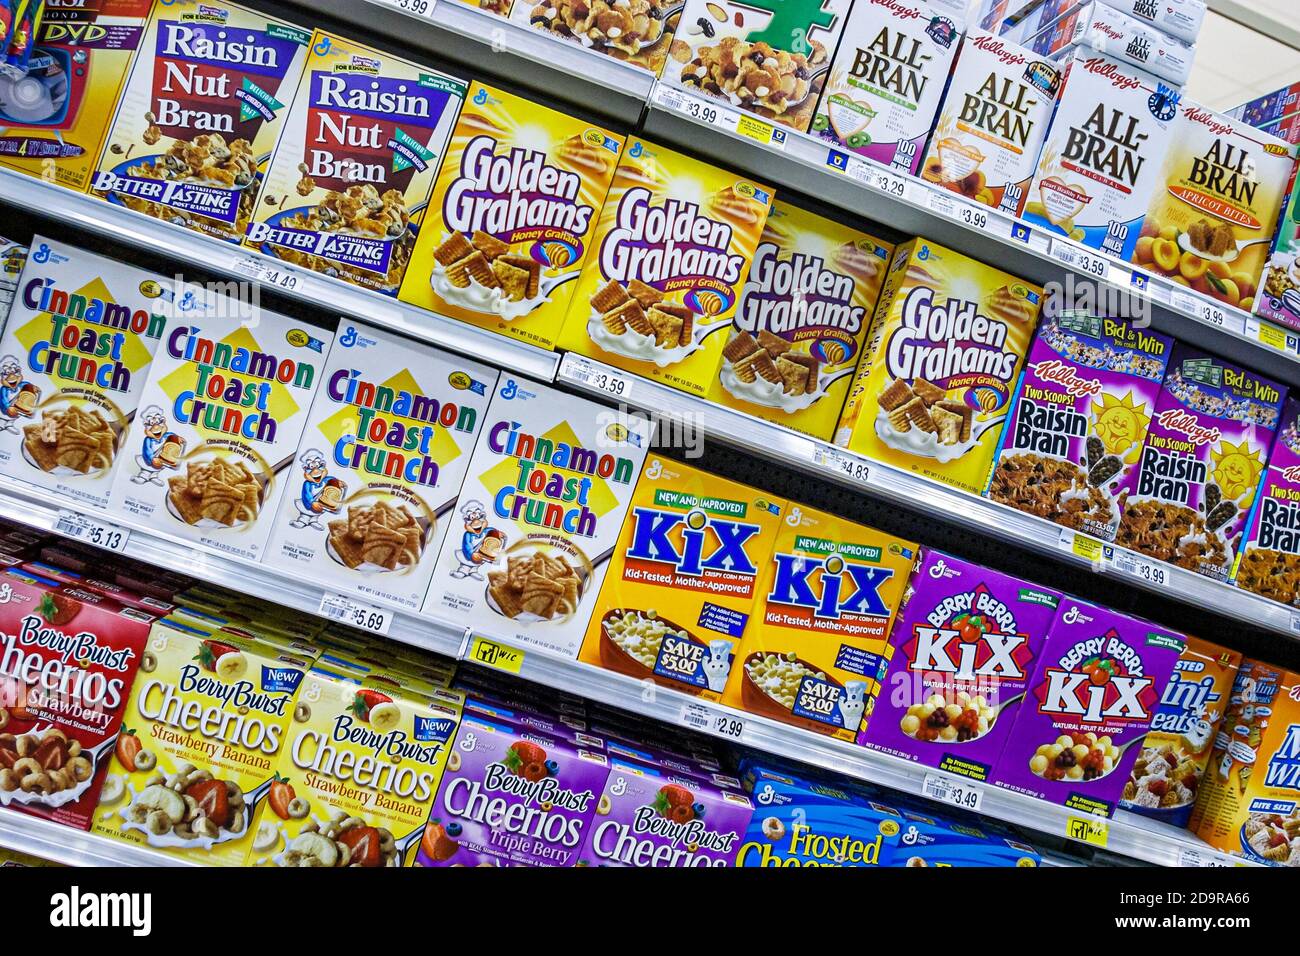 Miami Beach Florida,Publix Grocery Store groceries supermarket,packaging boxes shelf shelves breakfast cereal food display sale,General Mills Raisin N Stock Photo